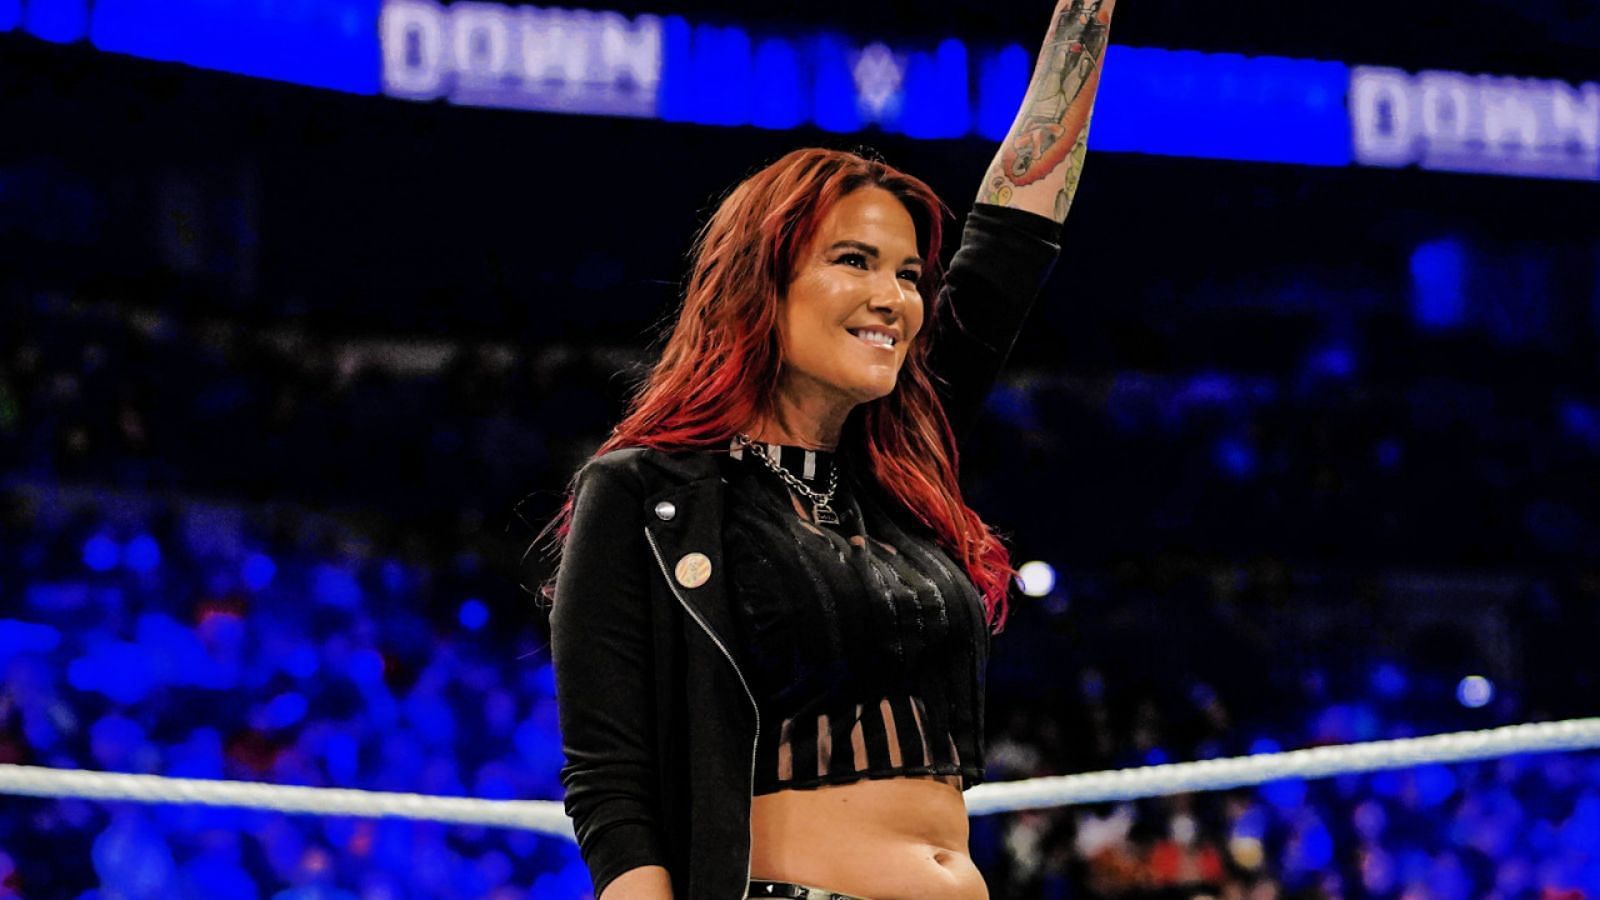 Lita discussed Royal Rumble participants being announced in advance